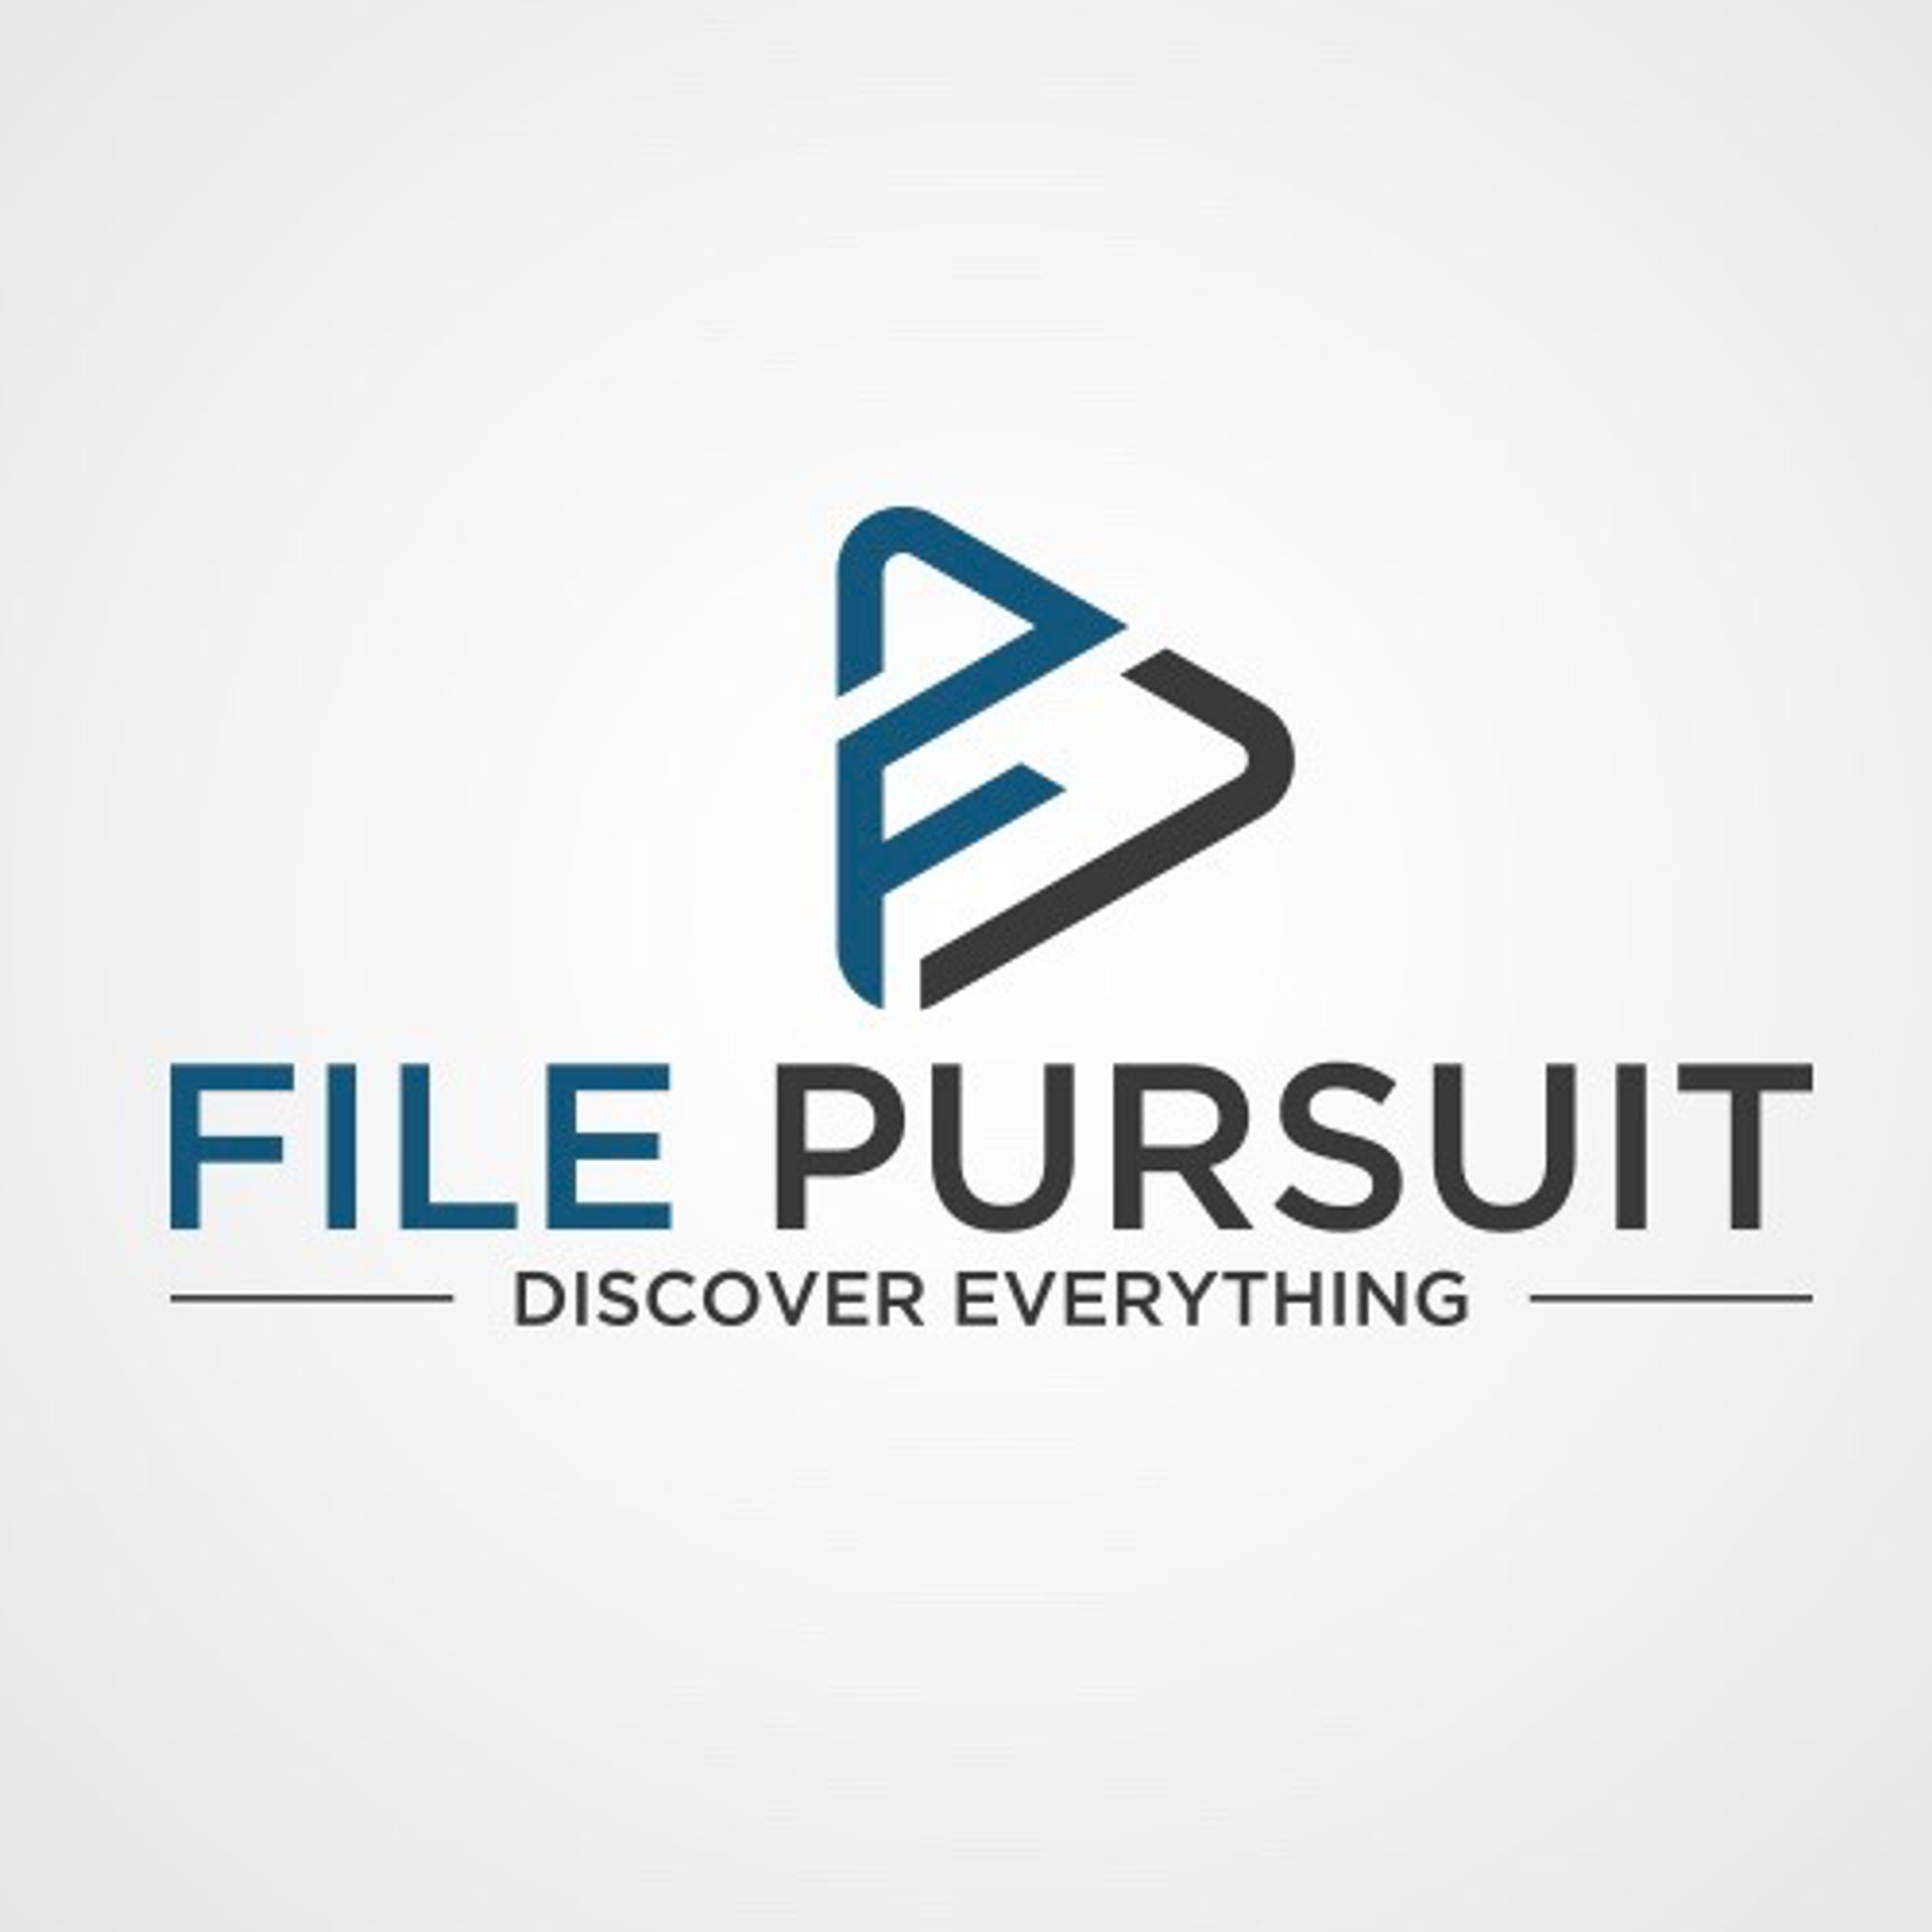 FilePursuit- Discover Everything!, Search the web for files, videos, audios, eBooks and much more.